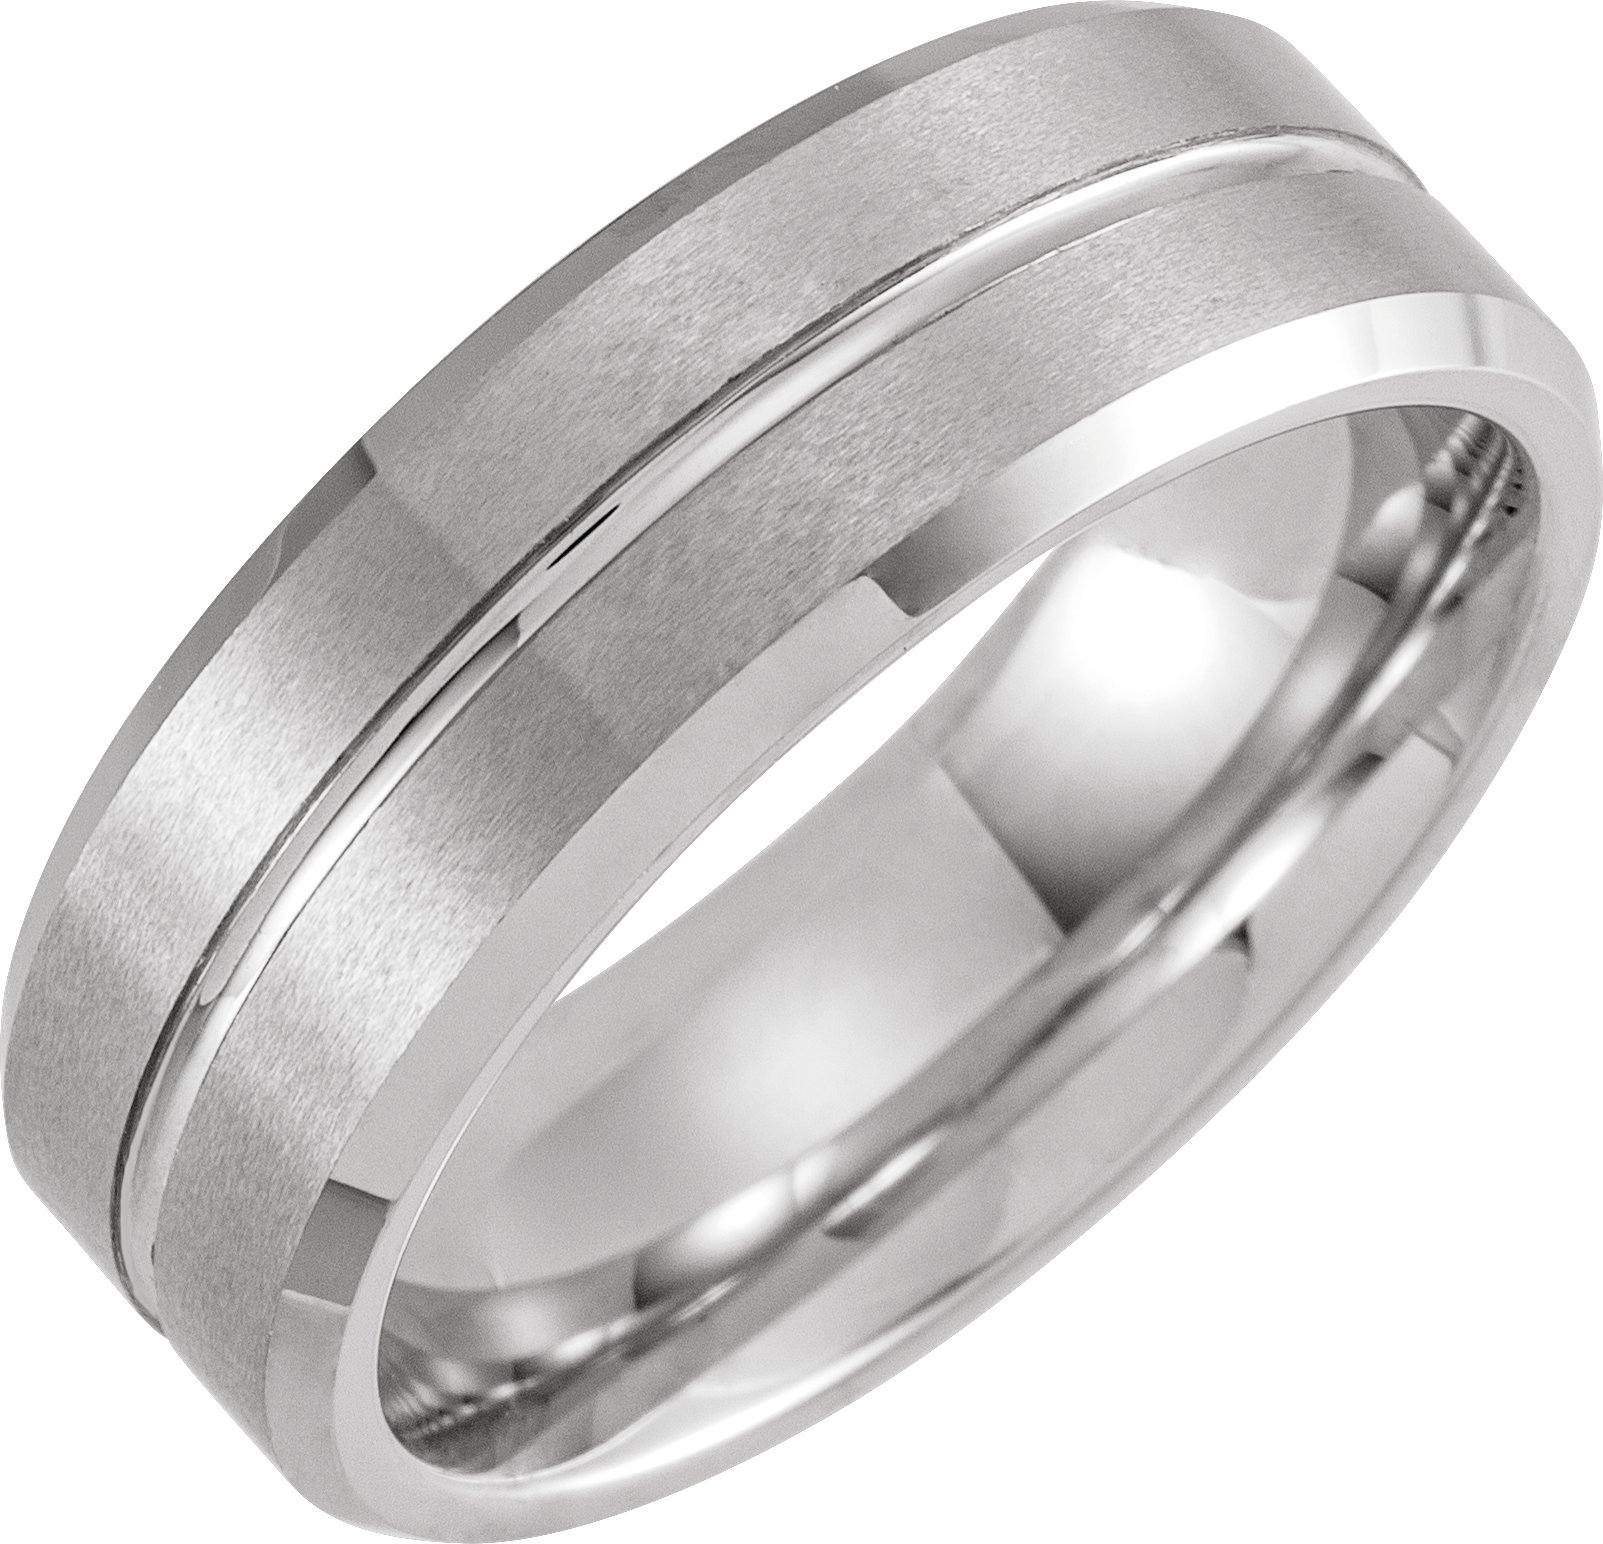 White PVD Tungsten 8 mm Beveled Grooved Matte Band Size 12 